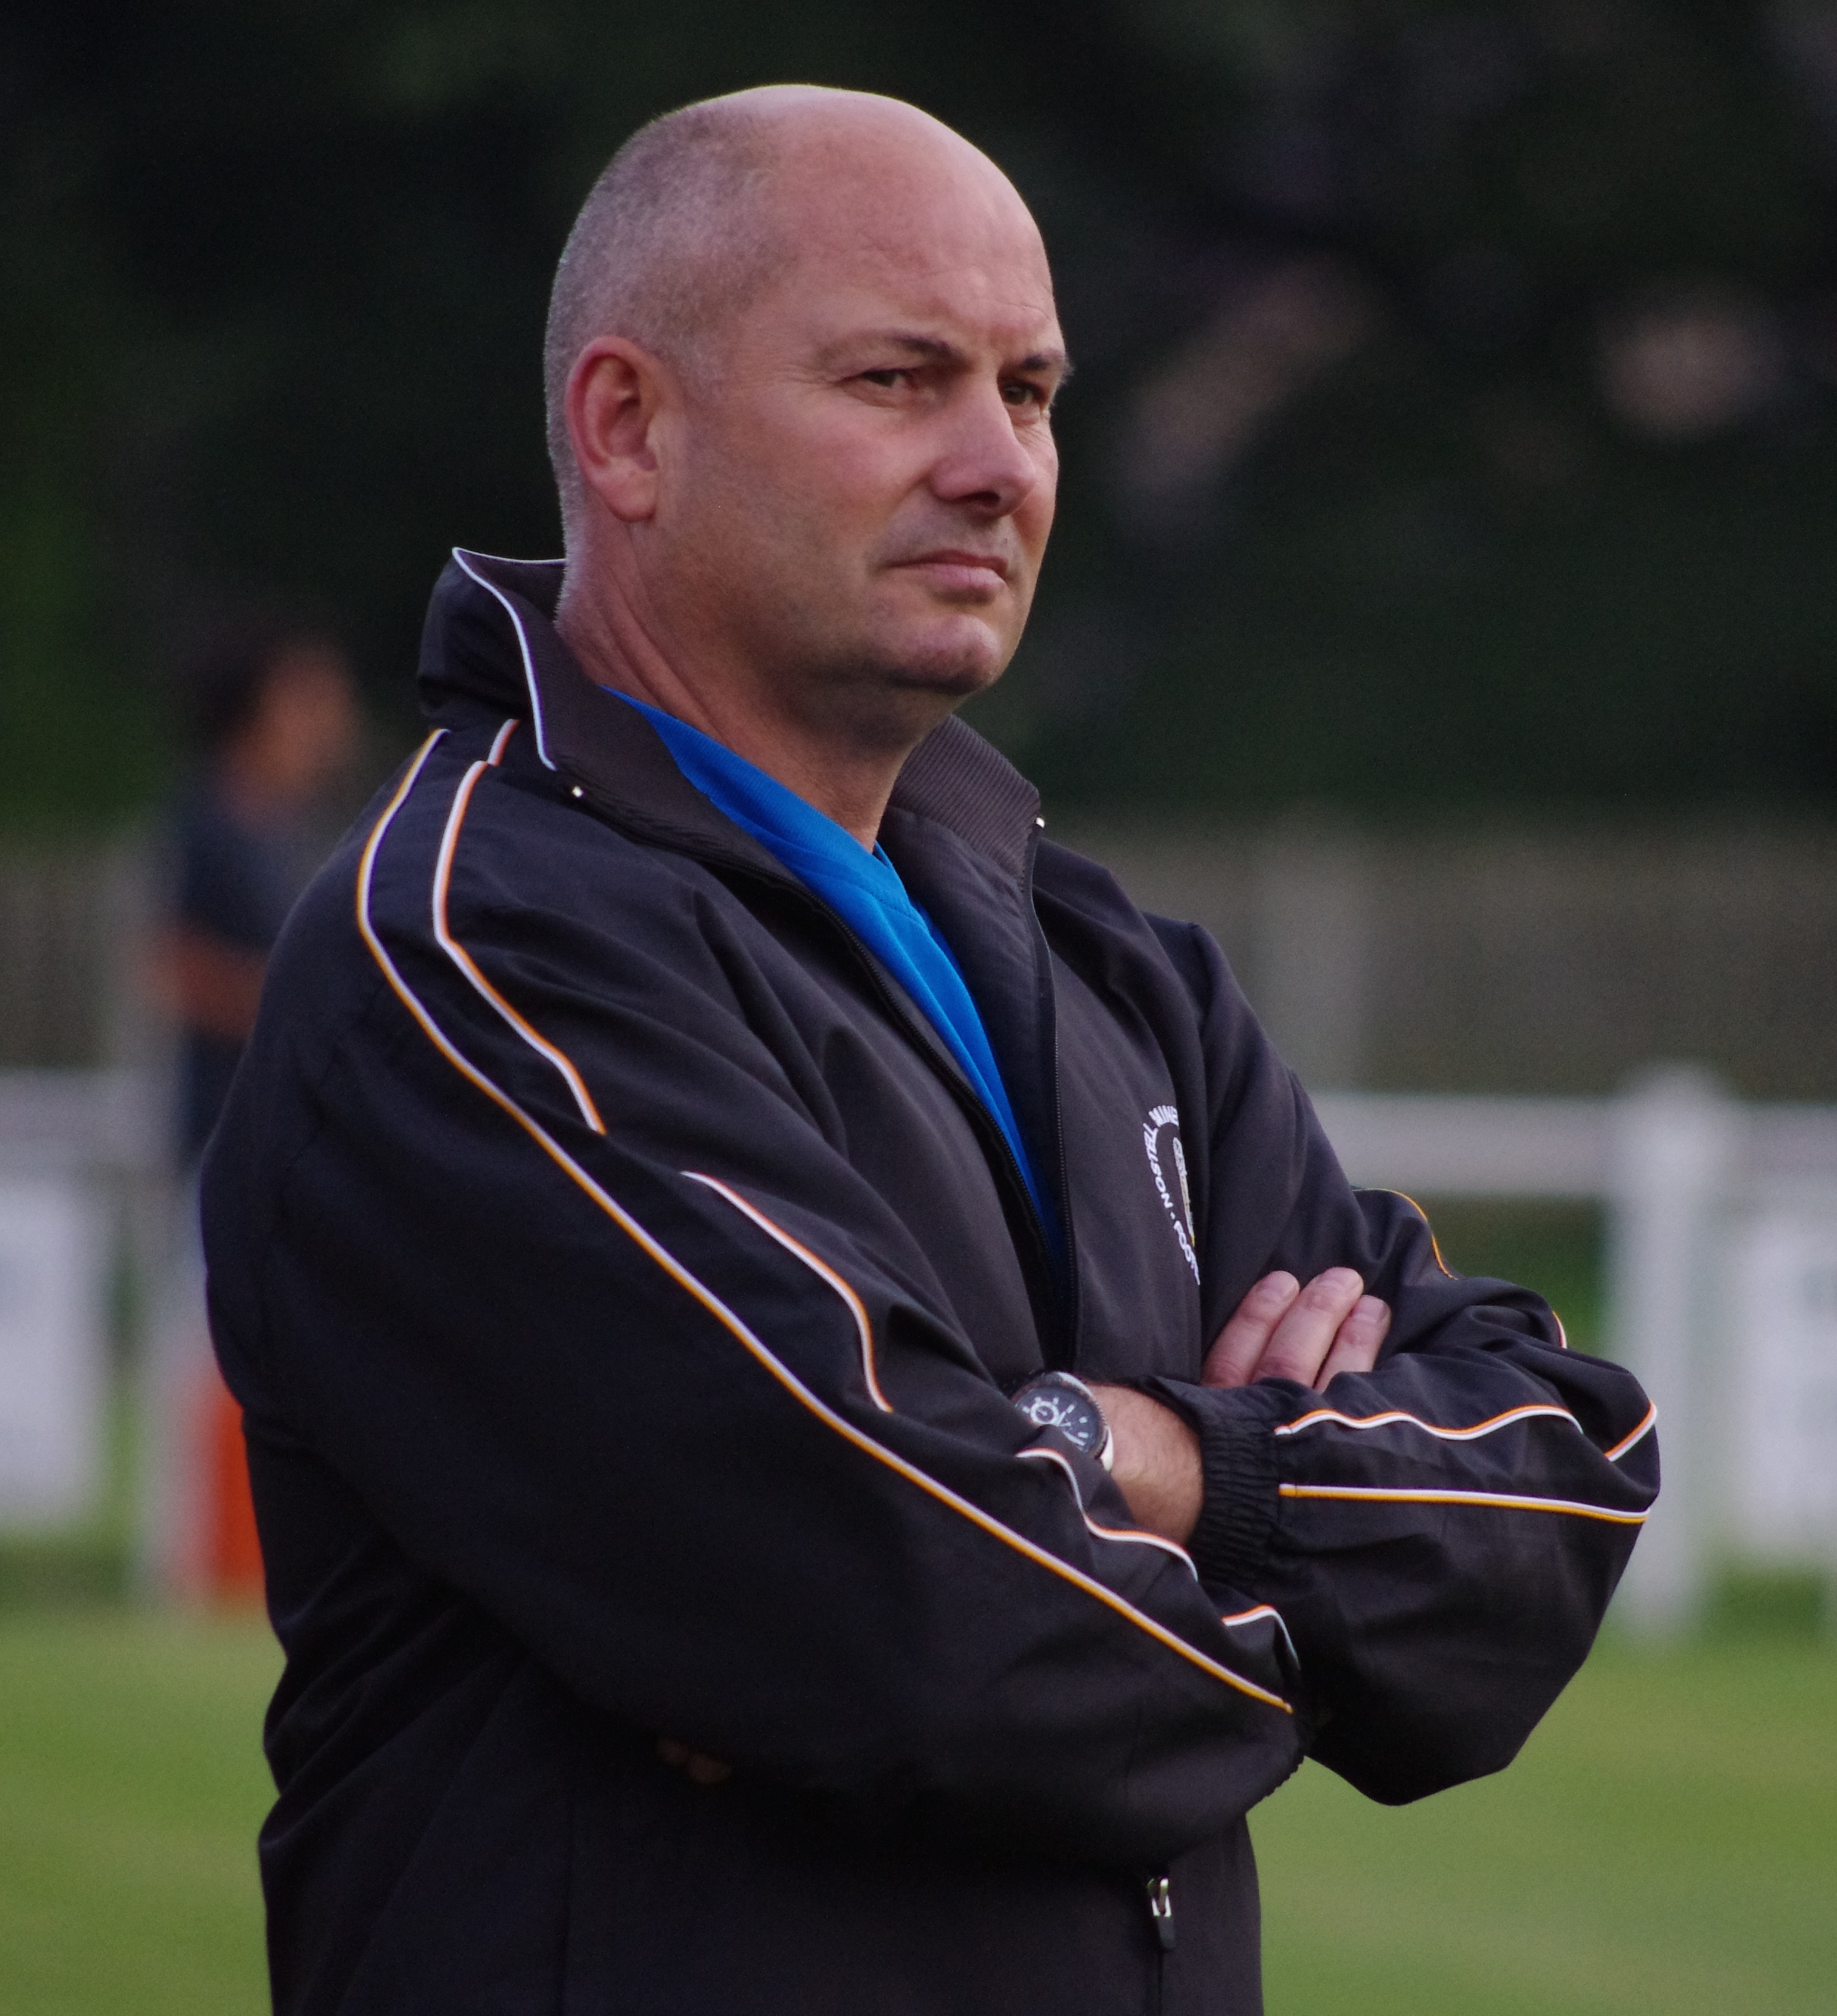 Nostell Miners Welfare manager Darren Holmes has admitted his disappointment at the manner of a player departure before the season has even started